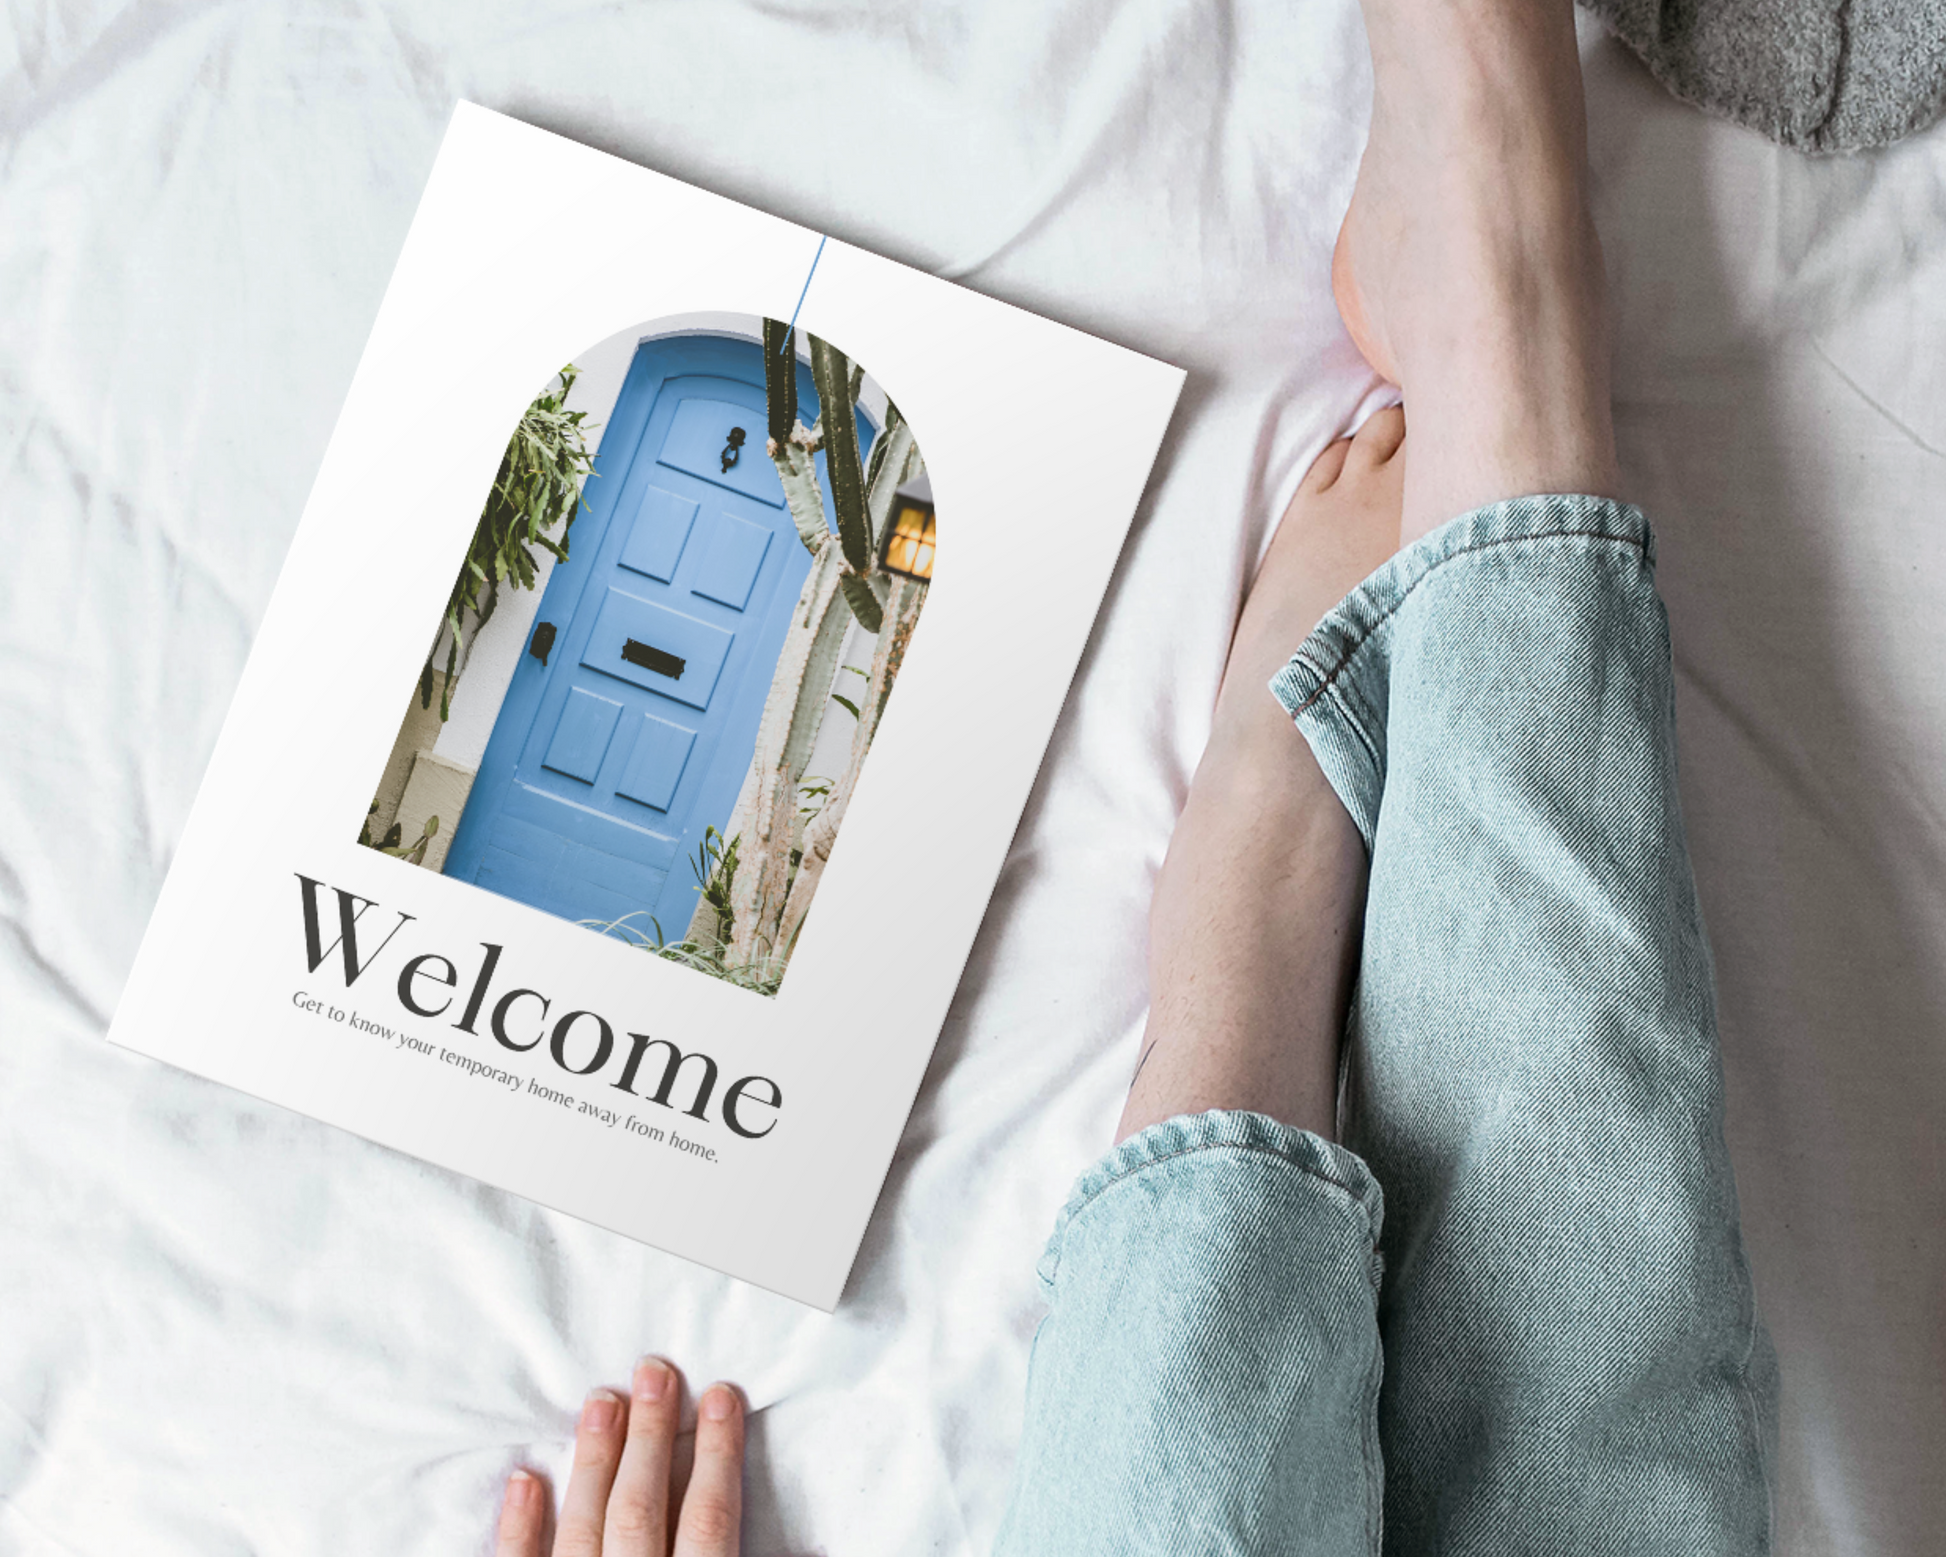 Real Estate Template – Guest Book For AirBnB